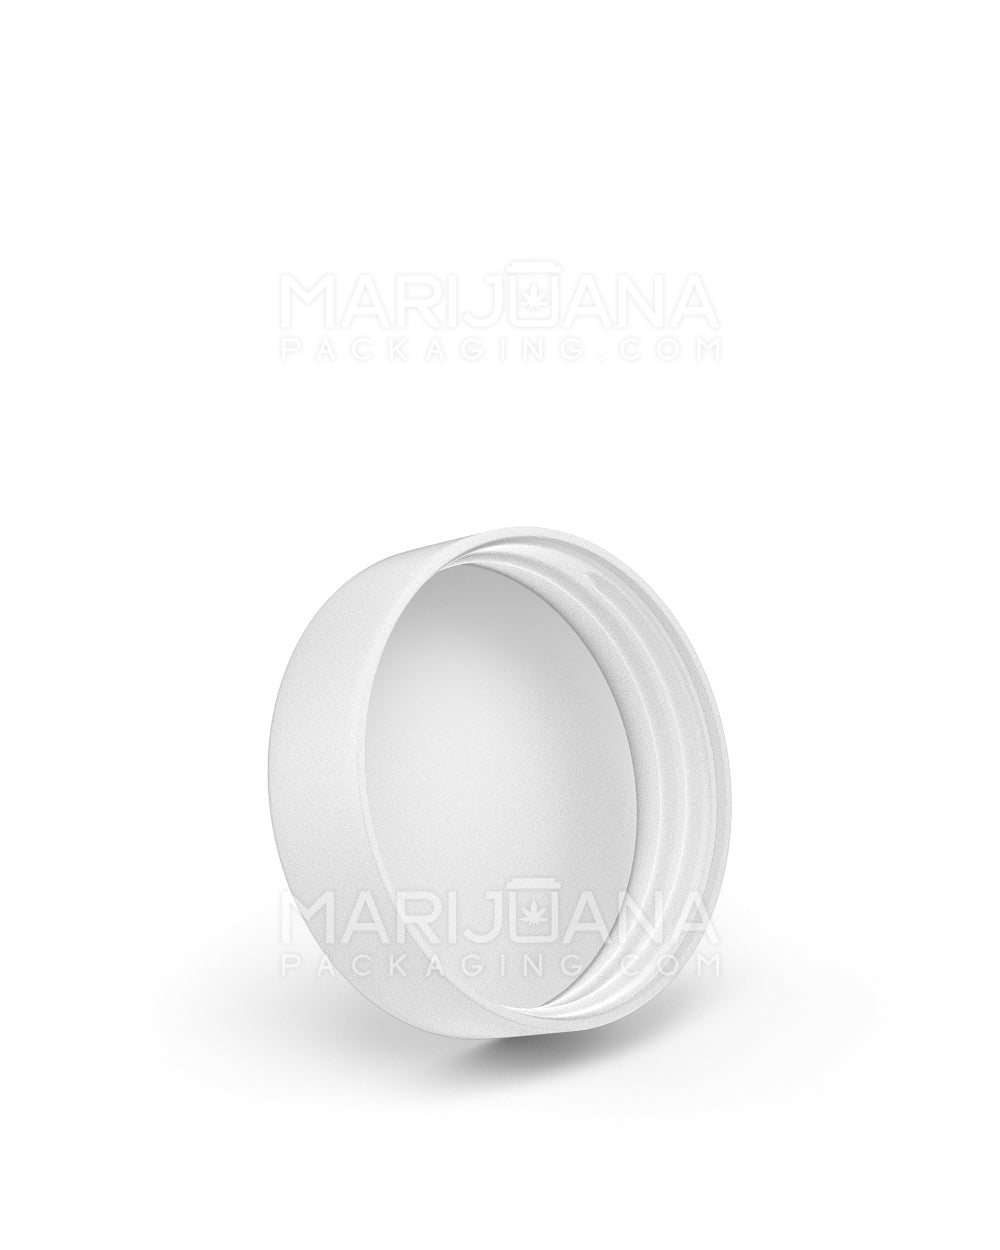 Child Resistant | Smooth Push Down & Turn Plastic Caps w/ Foam Liner | 50mm - Matte White - 100 Count - 2